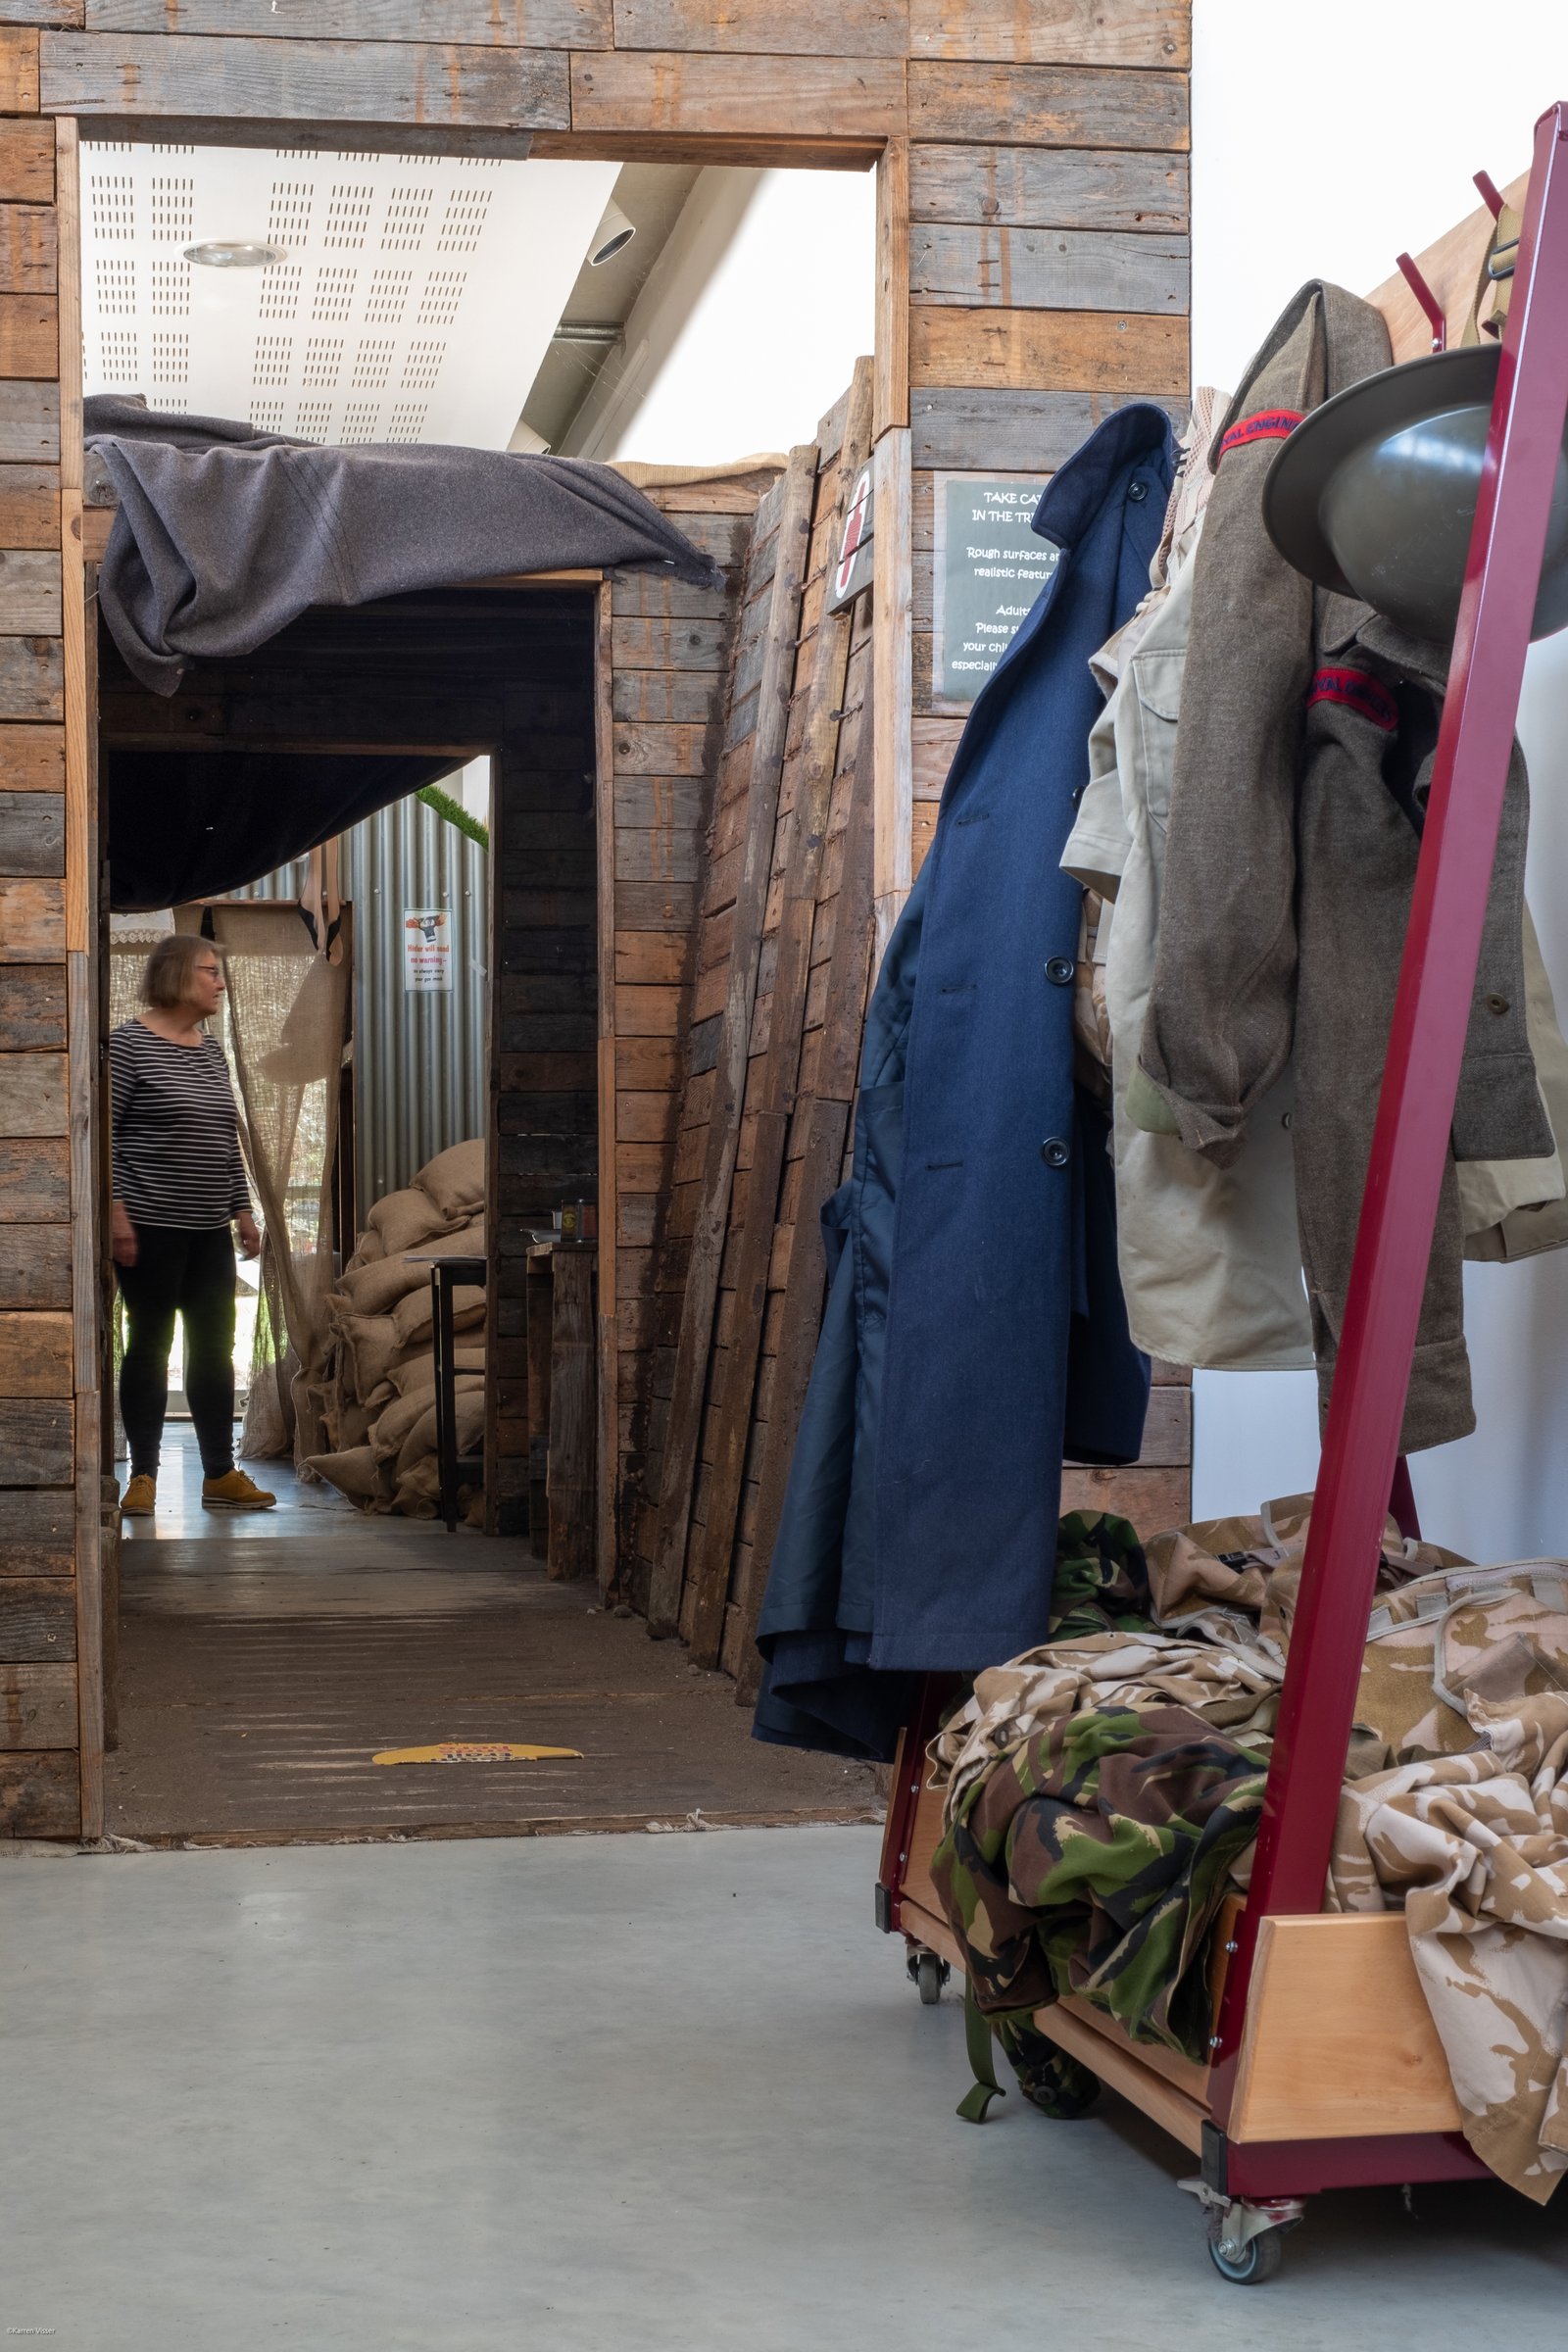 A white woman walks through a life-size air raid shelter and in the foreground is a display of military uniforms on a clothes rack.